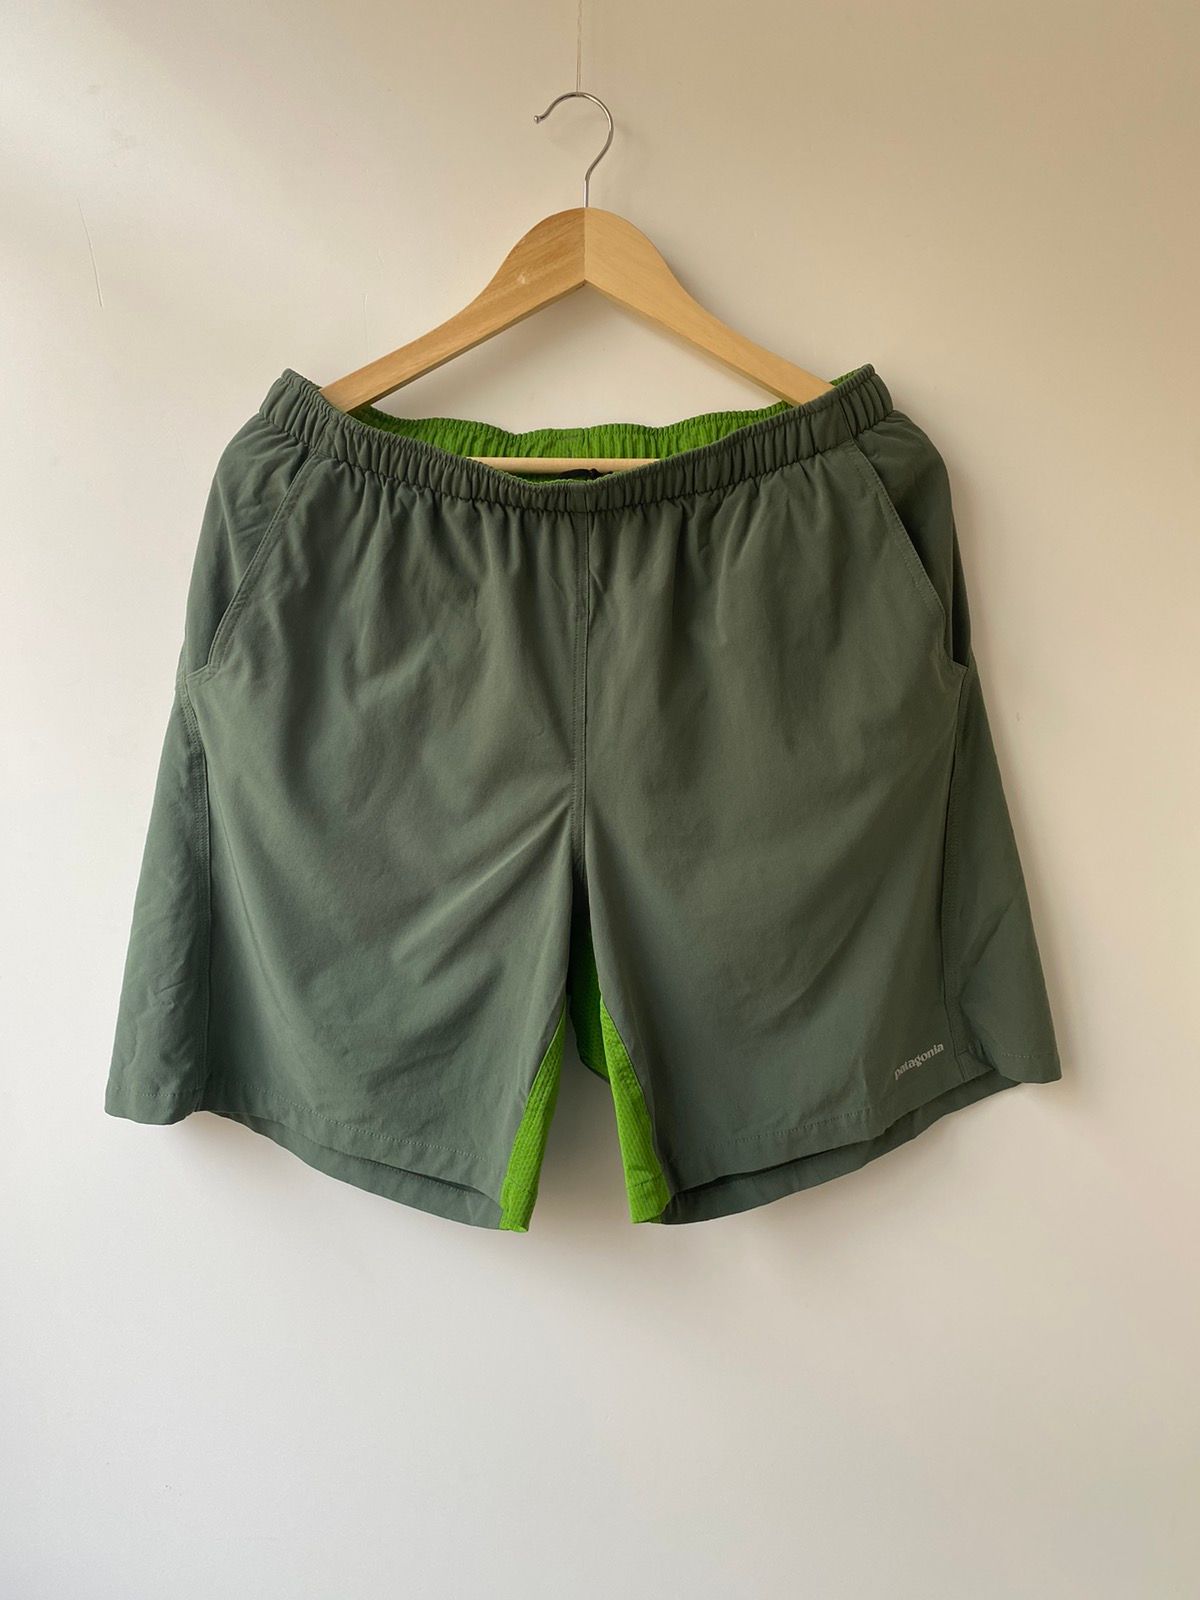 Patagonia Vintage Patagonia shorts outdoor style | Grailed